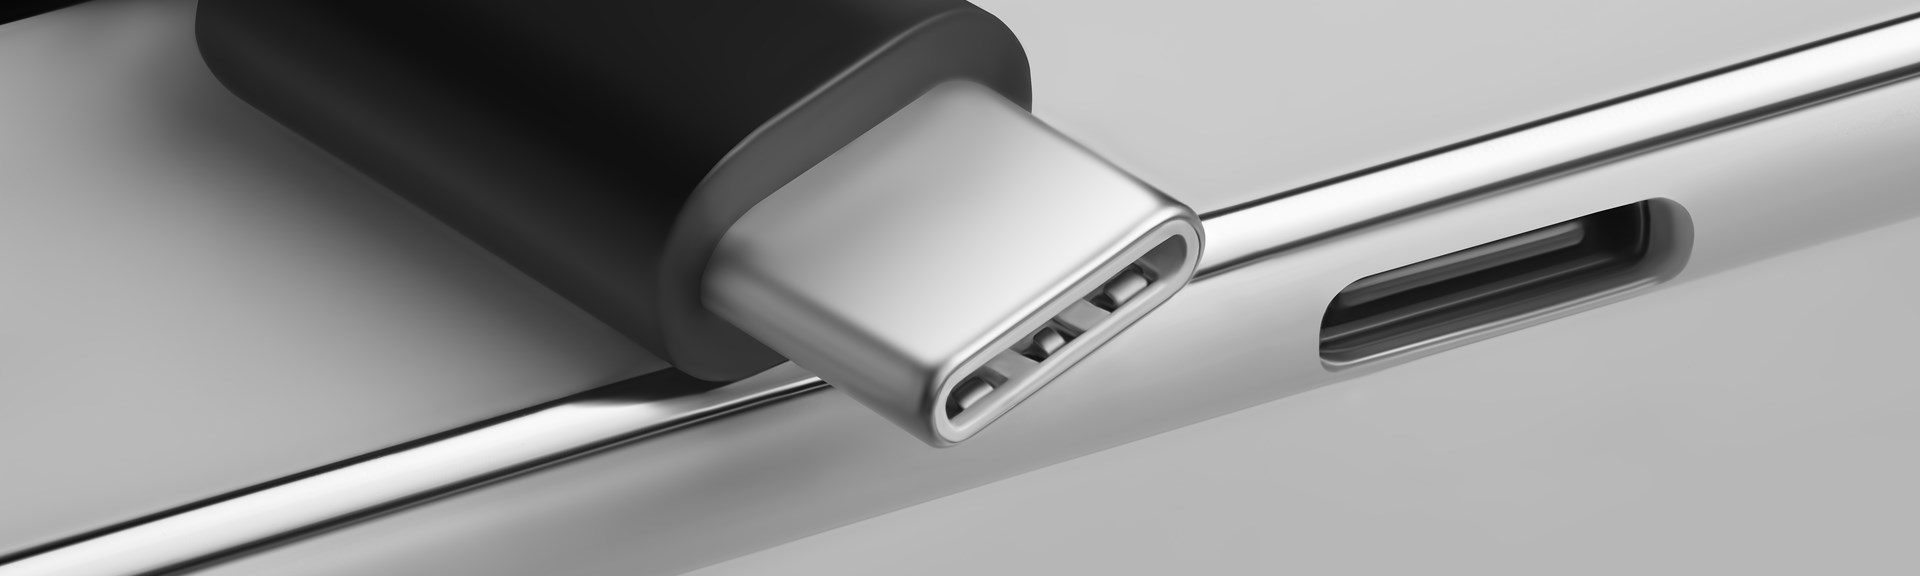 USB-C The New Directive Impacting EFB Solutions